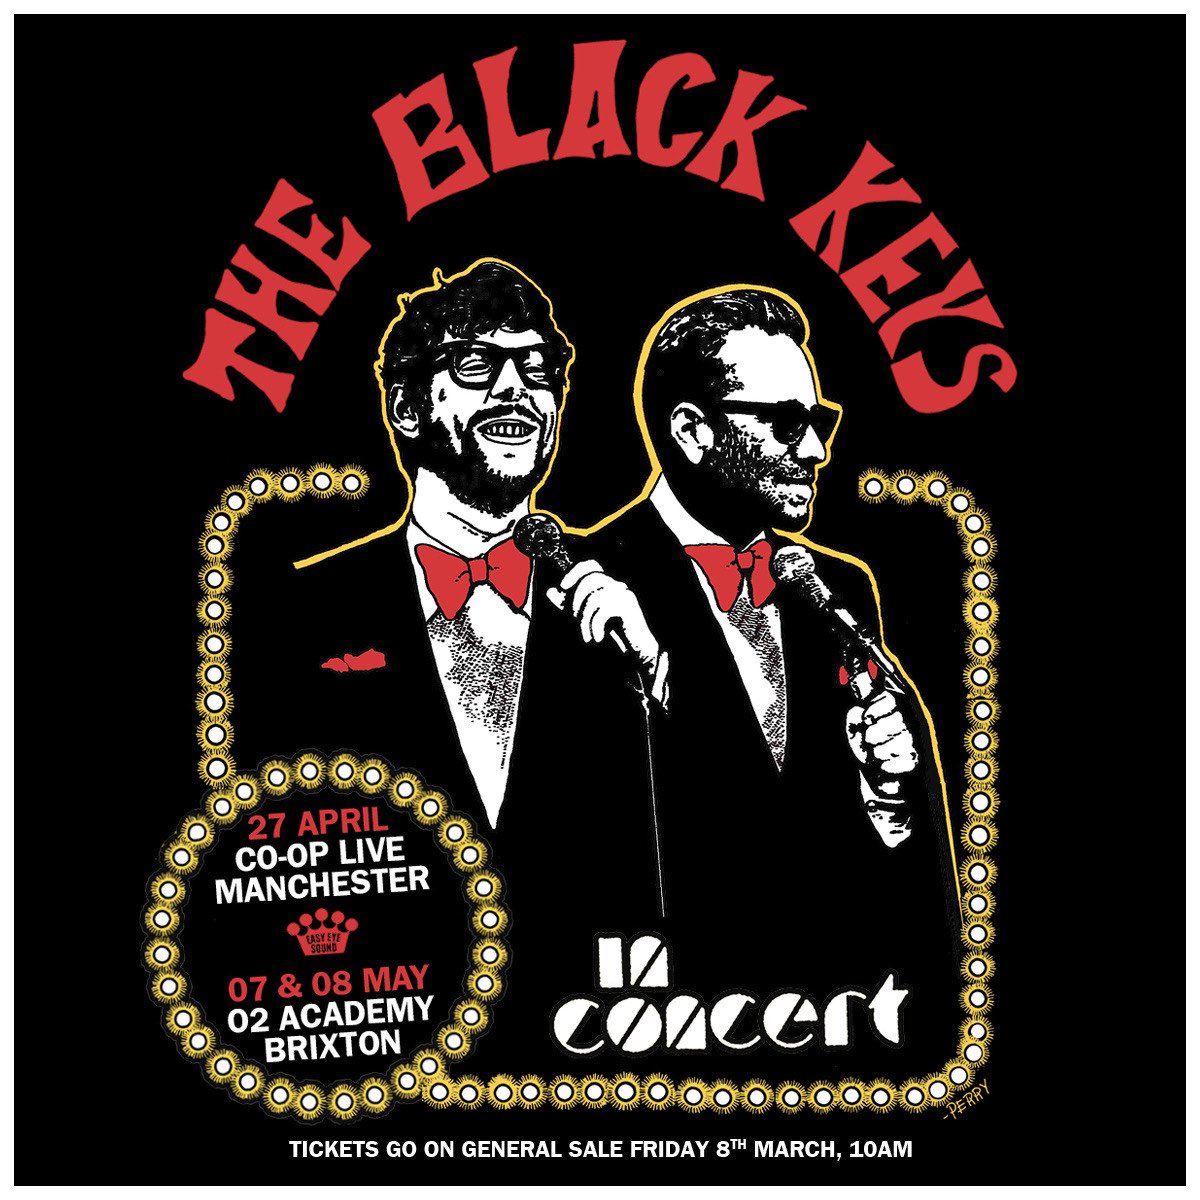 Pre-order our new album Ohio Players from our UK store before March 5th, 5pm GMT to access the exclusive fan pre-sale on March 6th, 10am GMT.   Fans who have already pre-ordered will also get access. Tickets go on sale Friday 8th March, 10am local time.  ukstore.theblackkeys.com